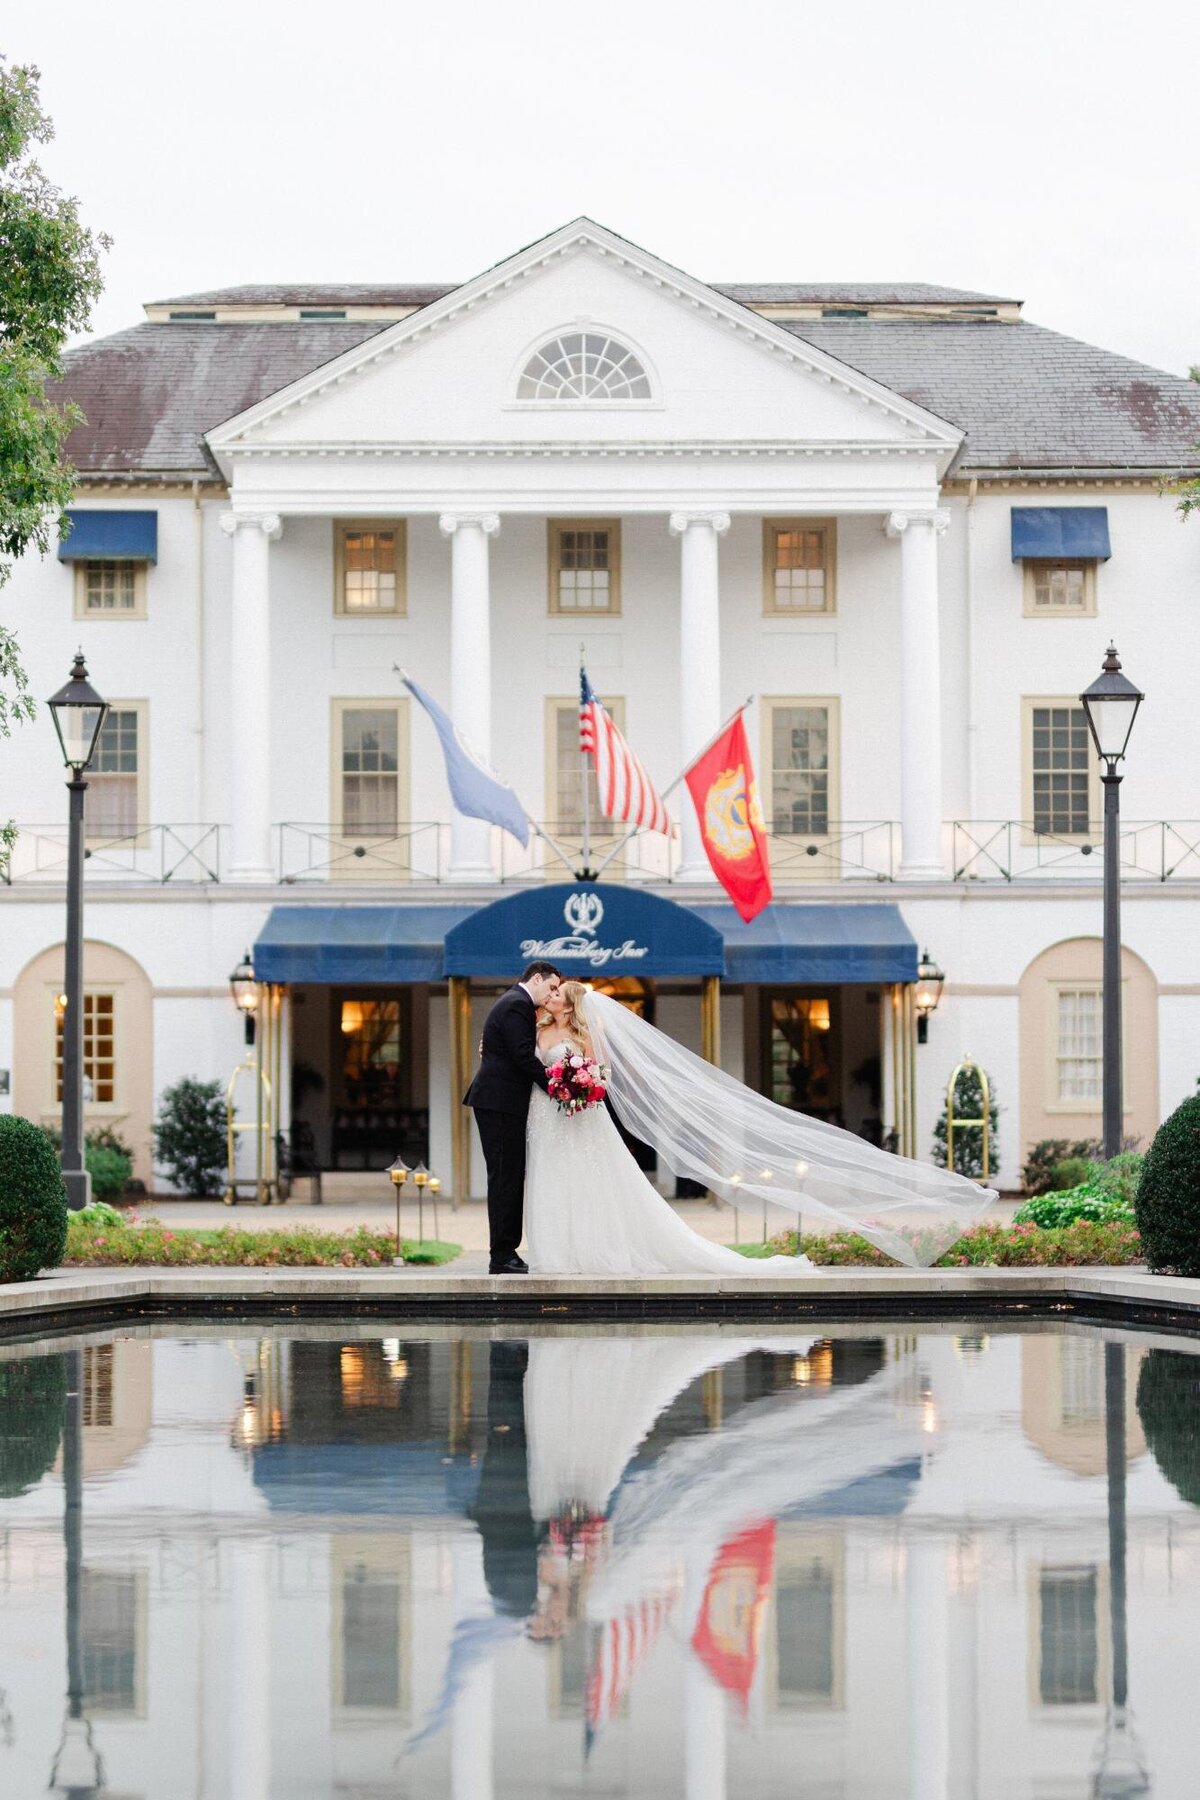 A couple stands by a reflective pool in front of an elegant building, with the bride's long veil flowing behind them.